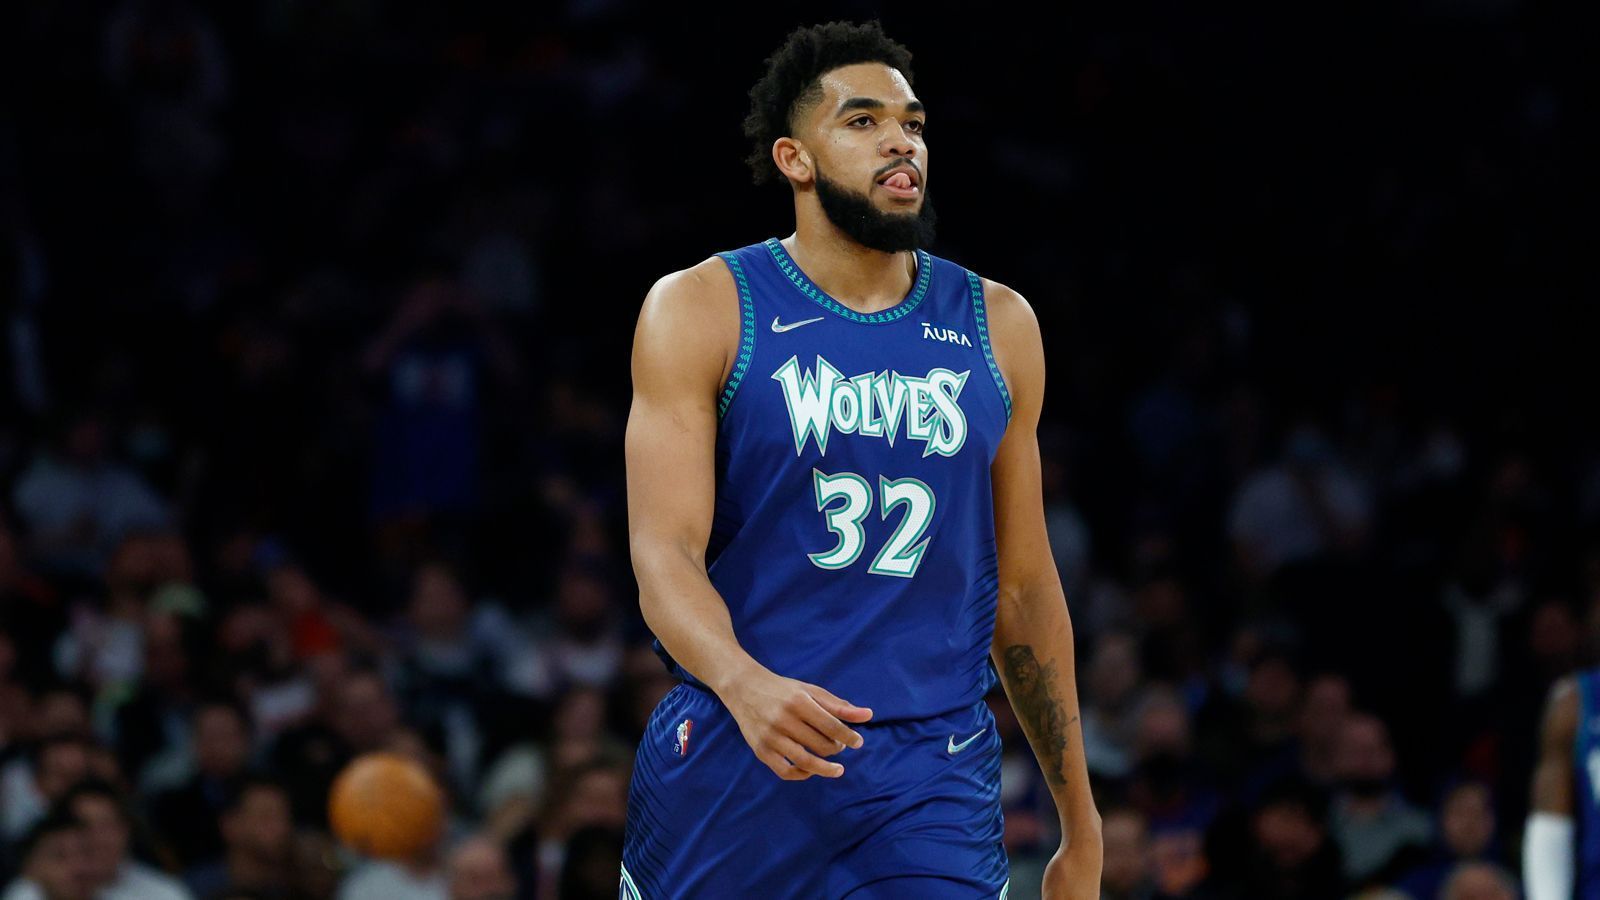 
                <strong>Karl-Anthony Towns (Minnesota Timberwolves/Reserve)</strong><br>
                &#x2022; Punkte: 24,1 -<br>&#x2022; Rebounds: 9,6 -<br>&#x2022; Assists: 4,0 -<br>&#x2022; All-Star Nominierungen: 3. <br>
              